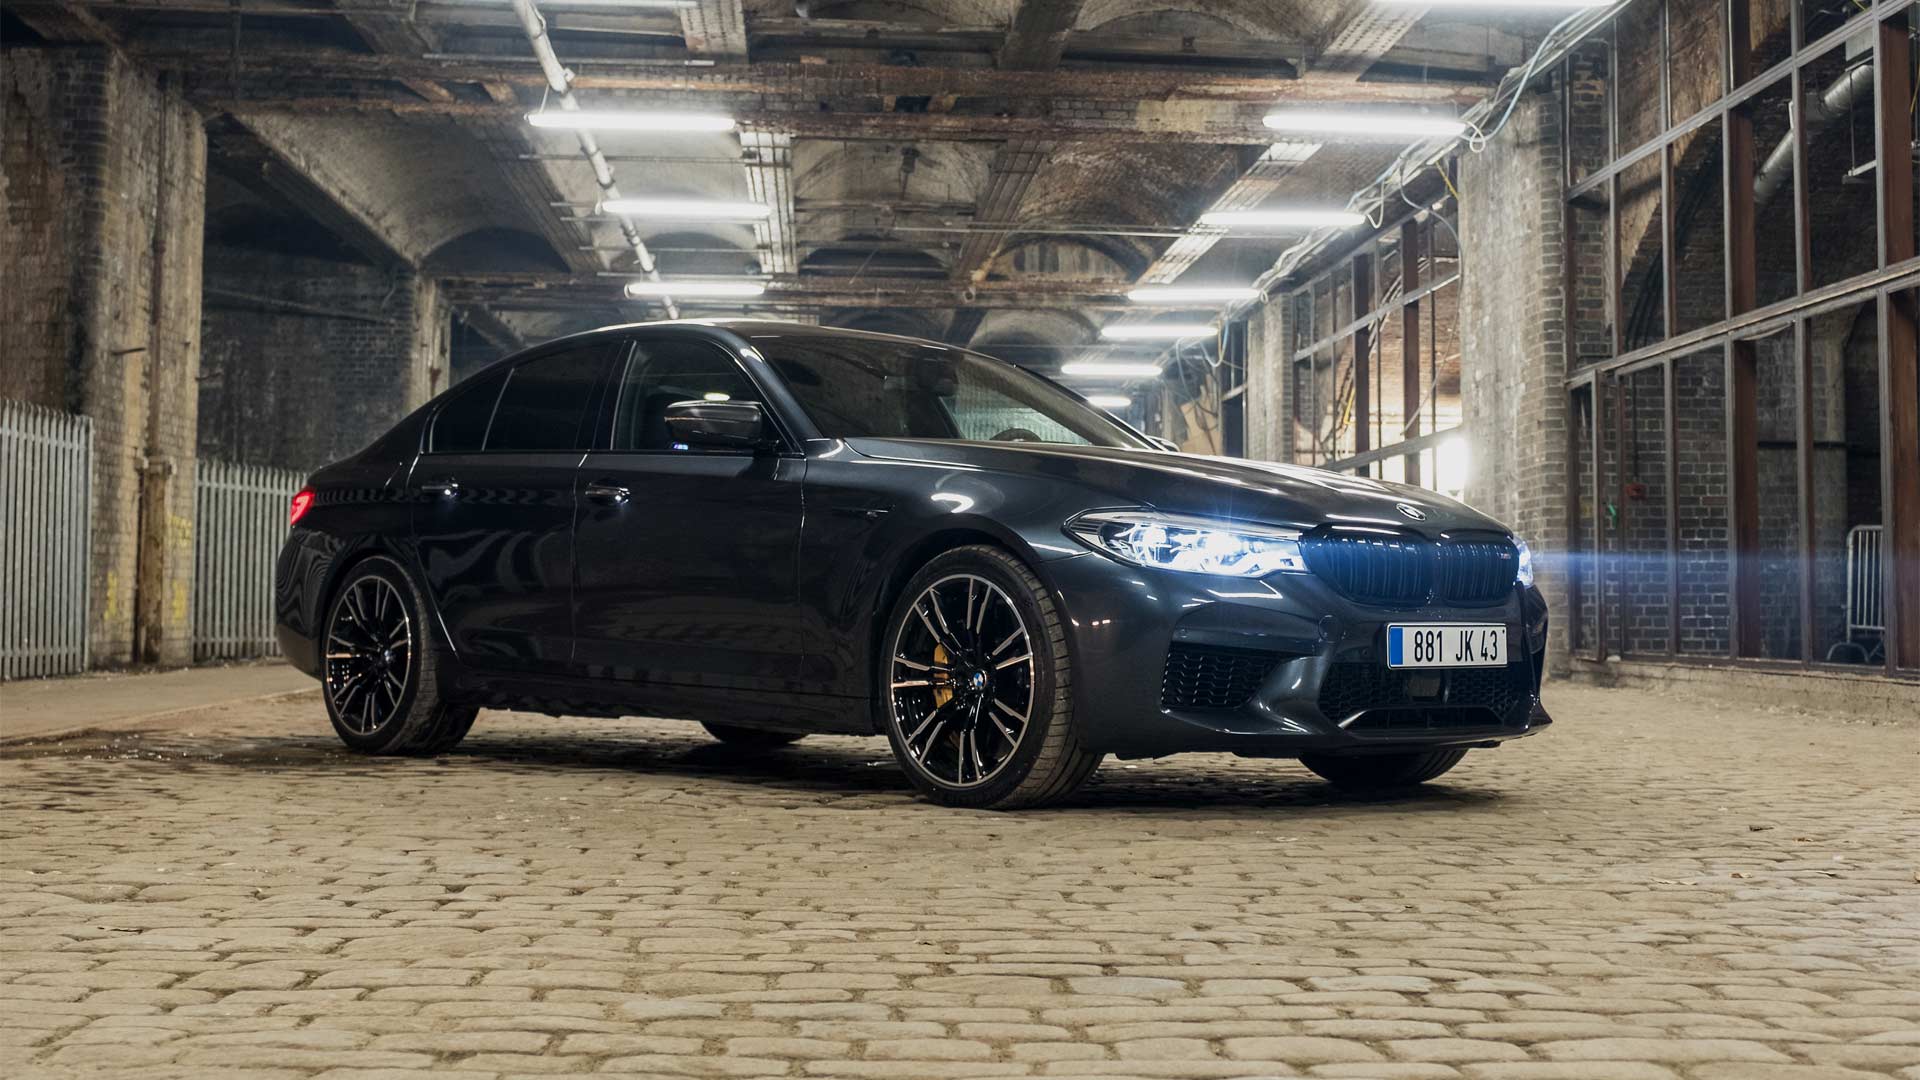 2018-BMW-M5-Mission-Impossible-Fallout